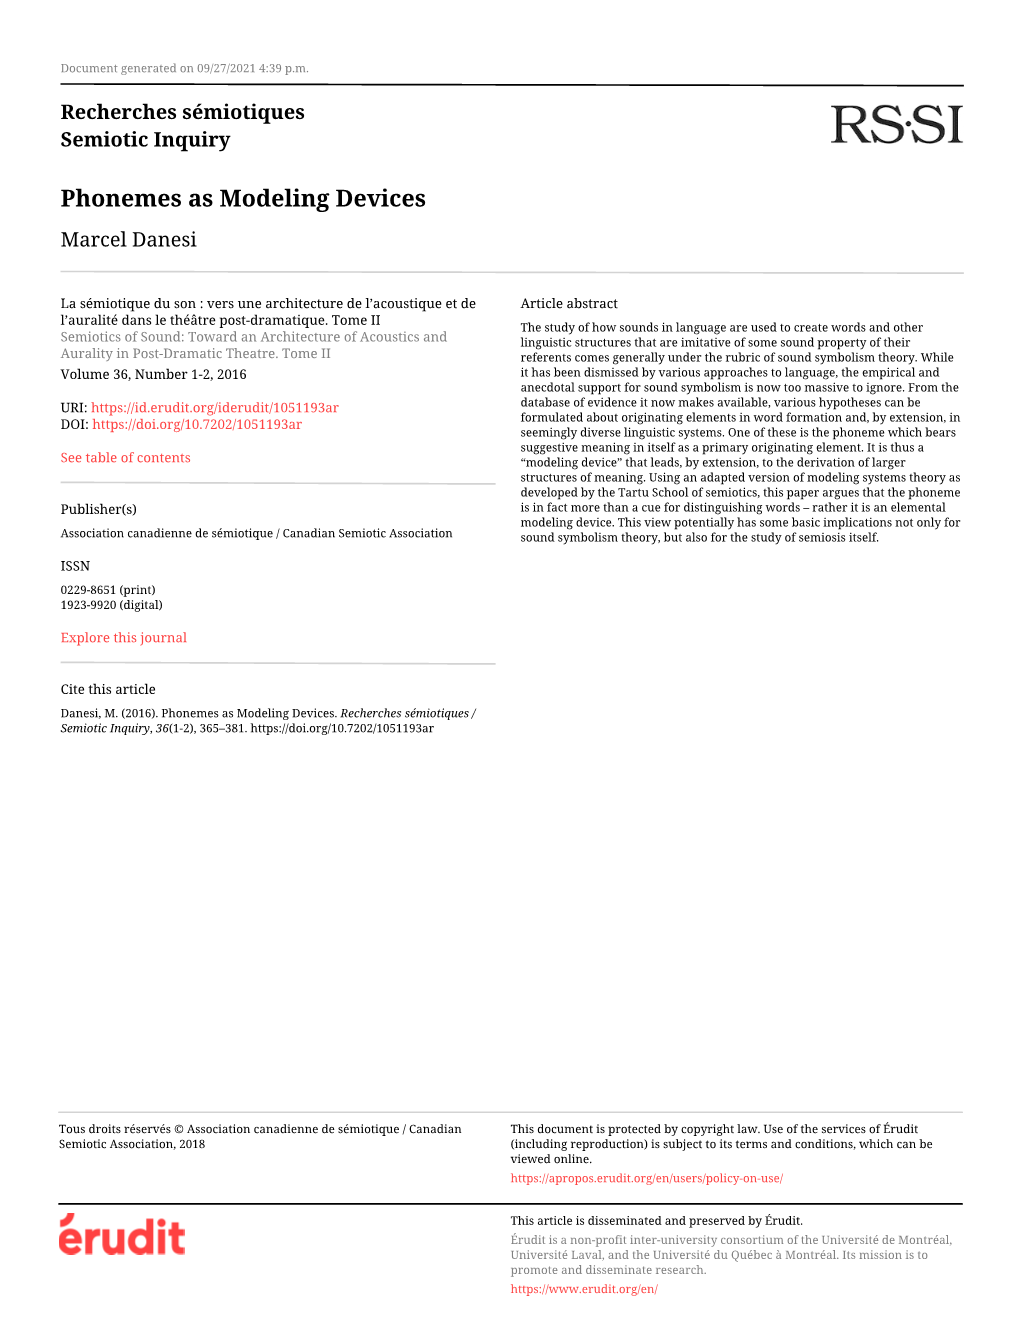 Phonemes As Modeling Devices Marcel Danesi